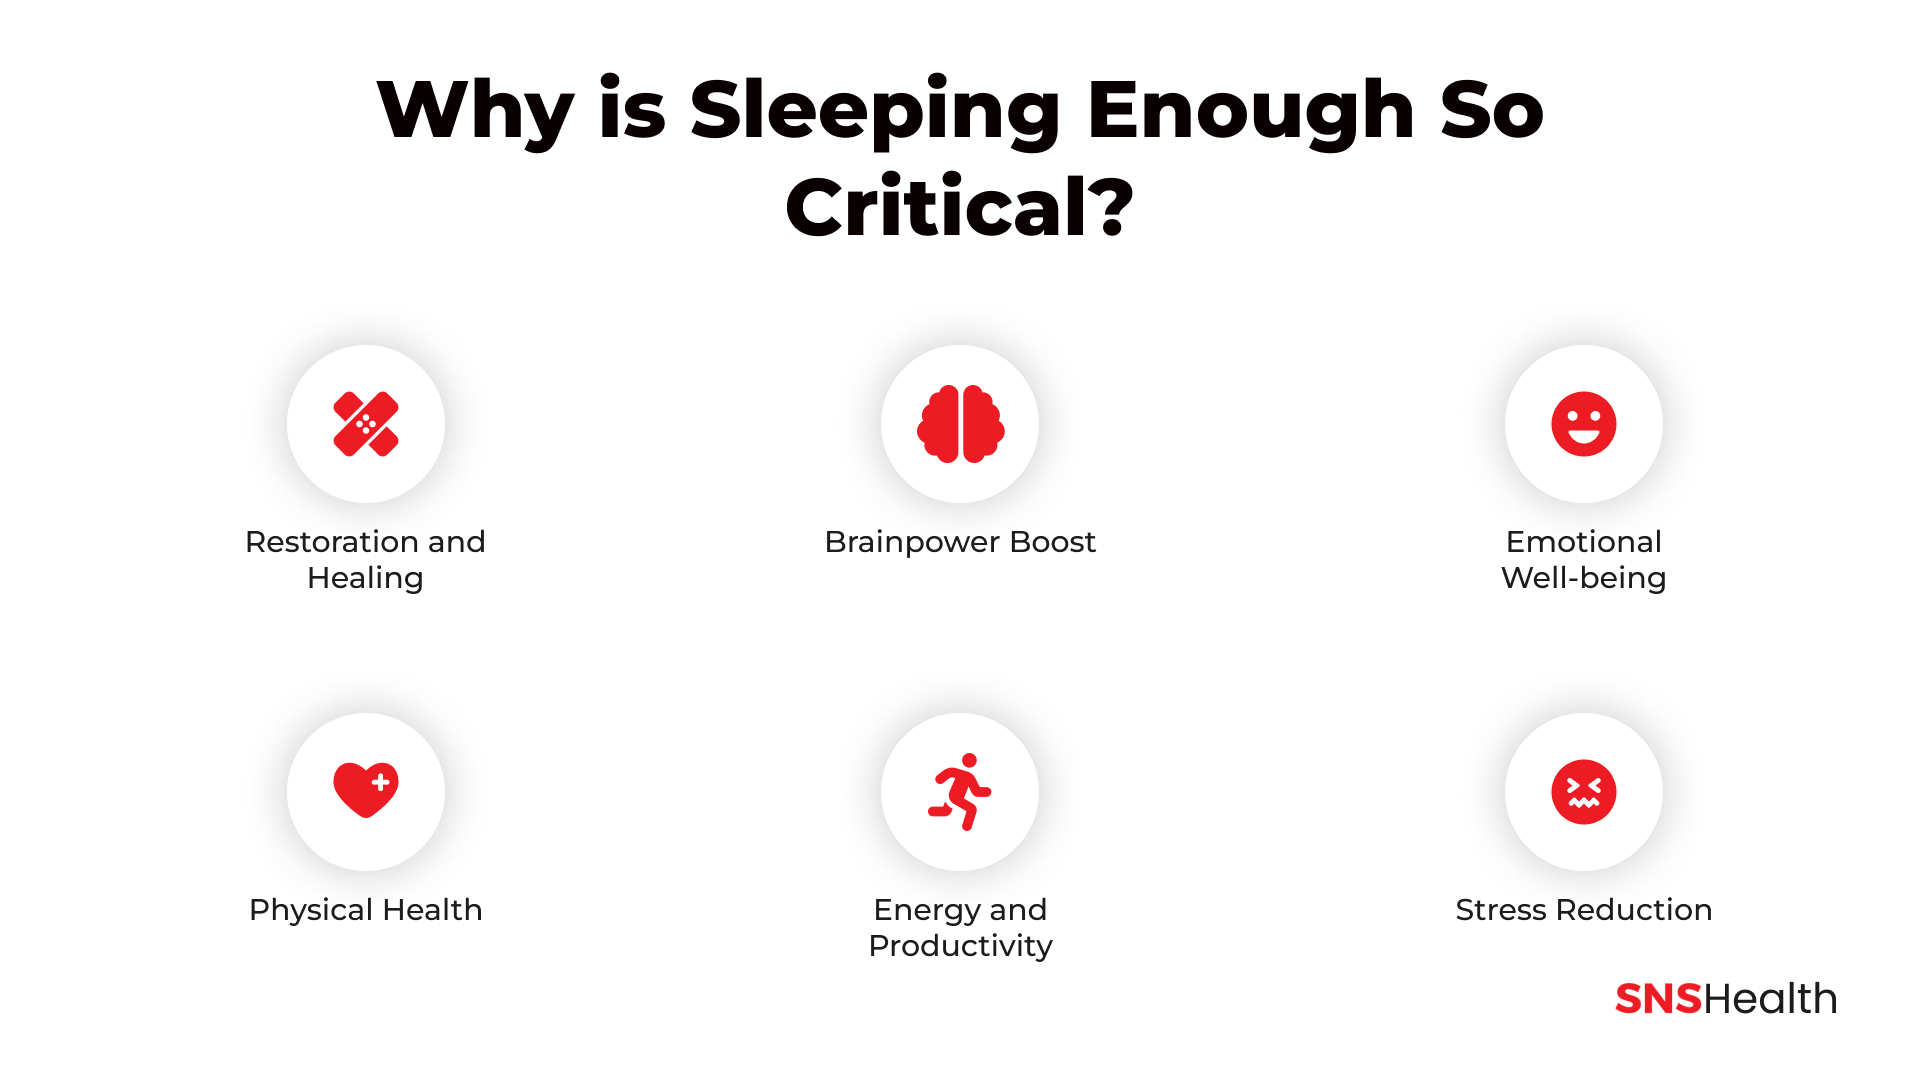 Why is Sleeping Enough So Critical